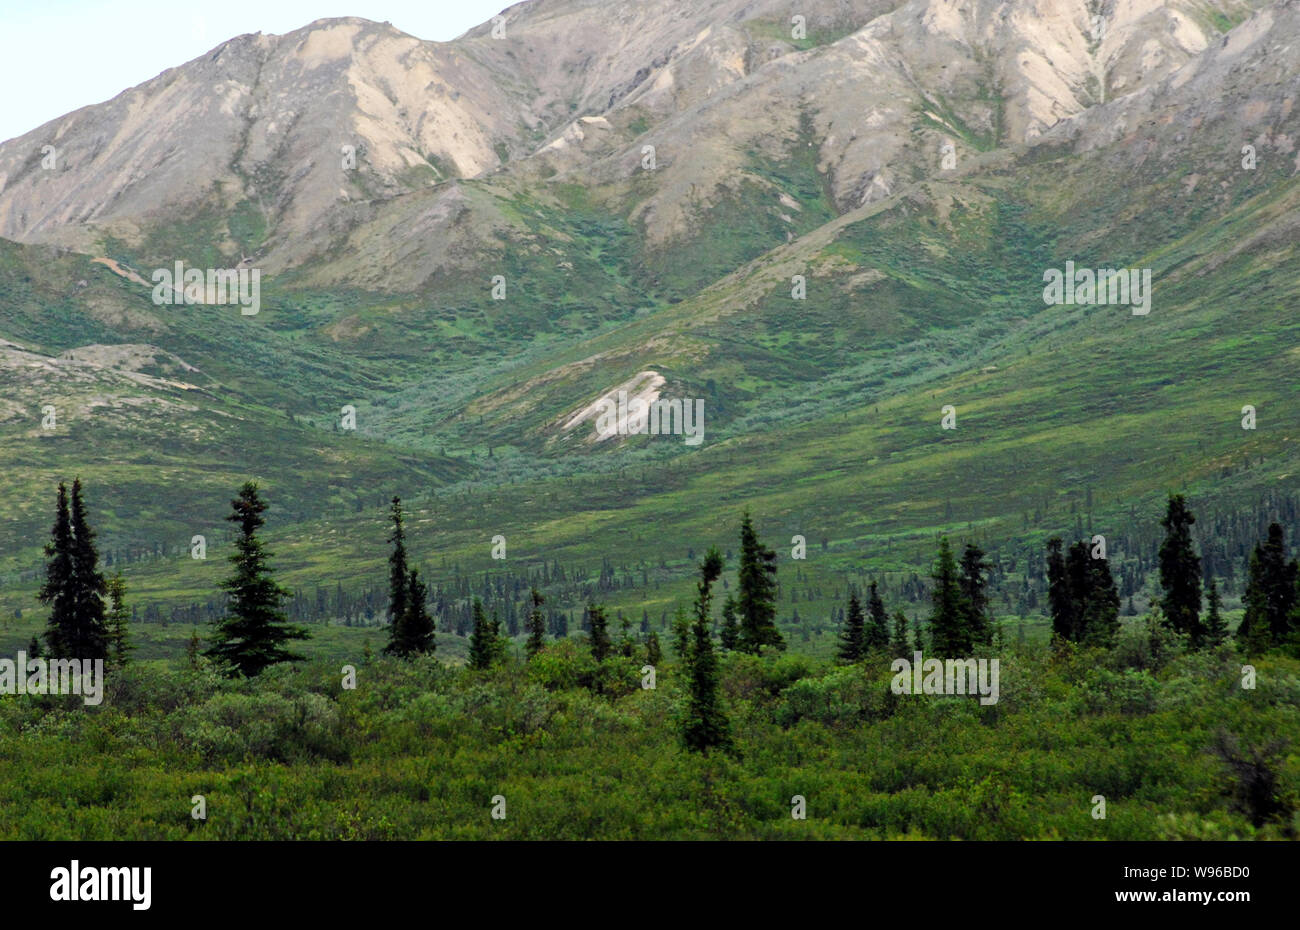 Beautiful panoramic landscape of the Black Spruce trees, berry bushes and mountains in Denali National Park, Alaska, USA Stock Photo